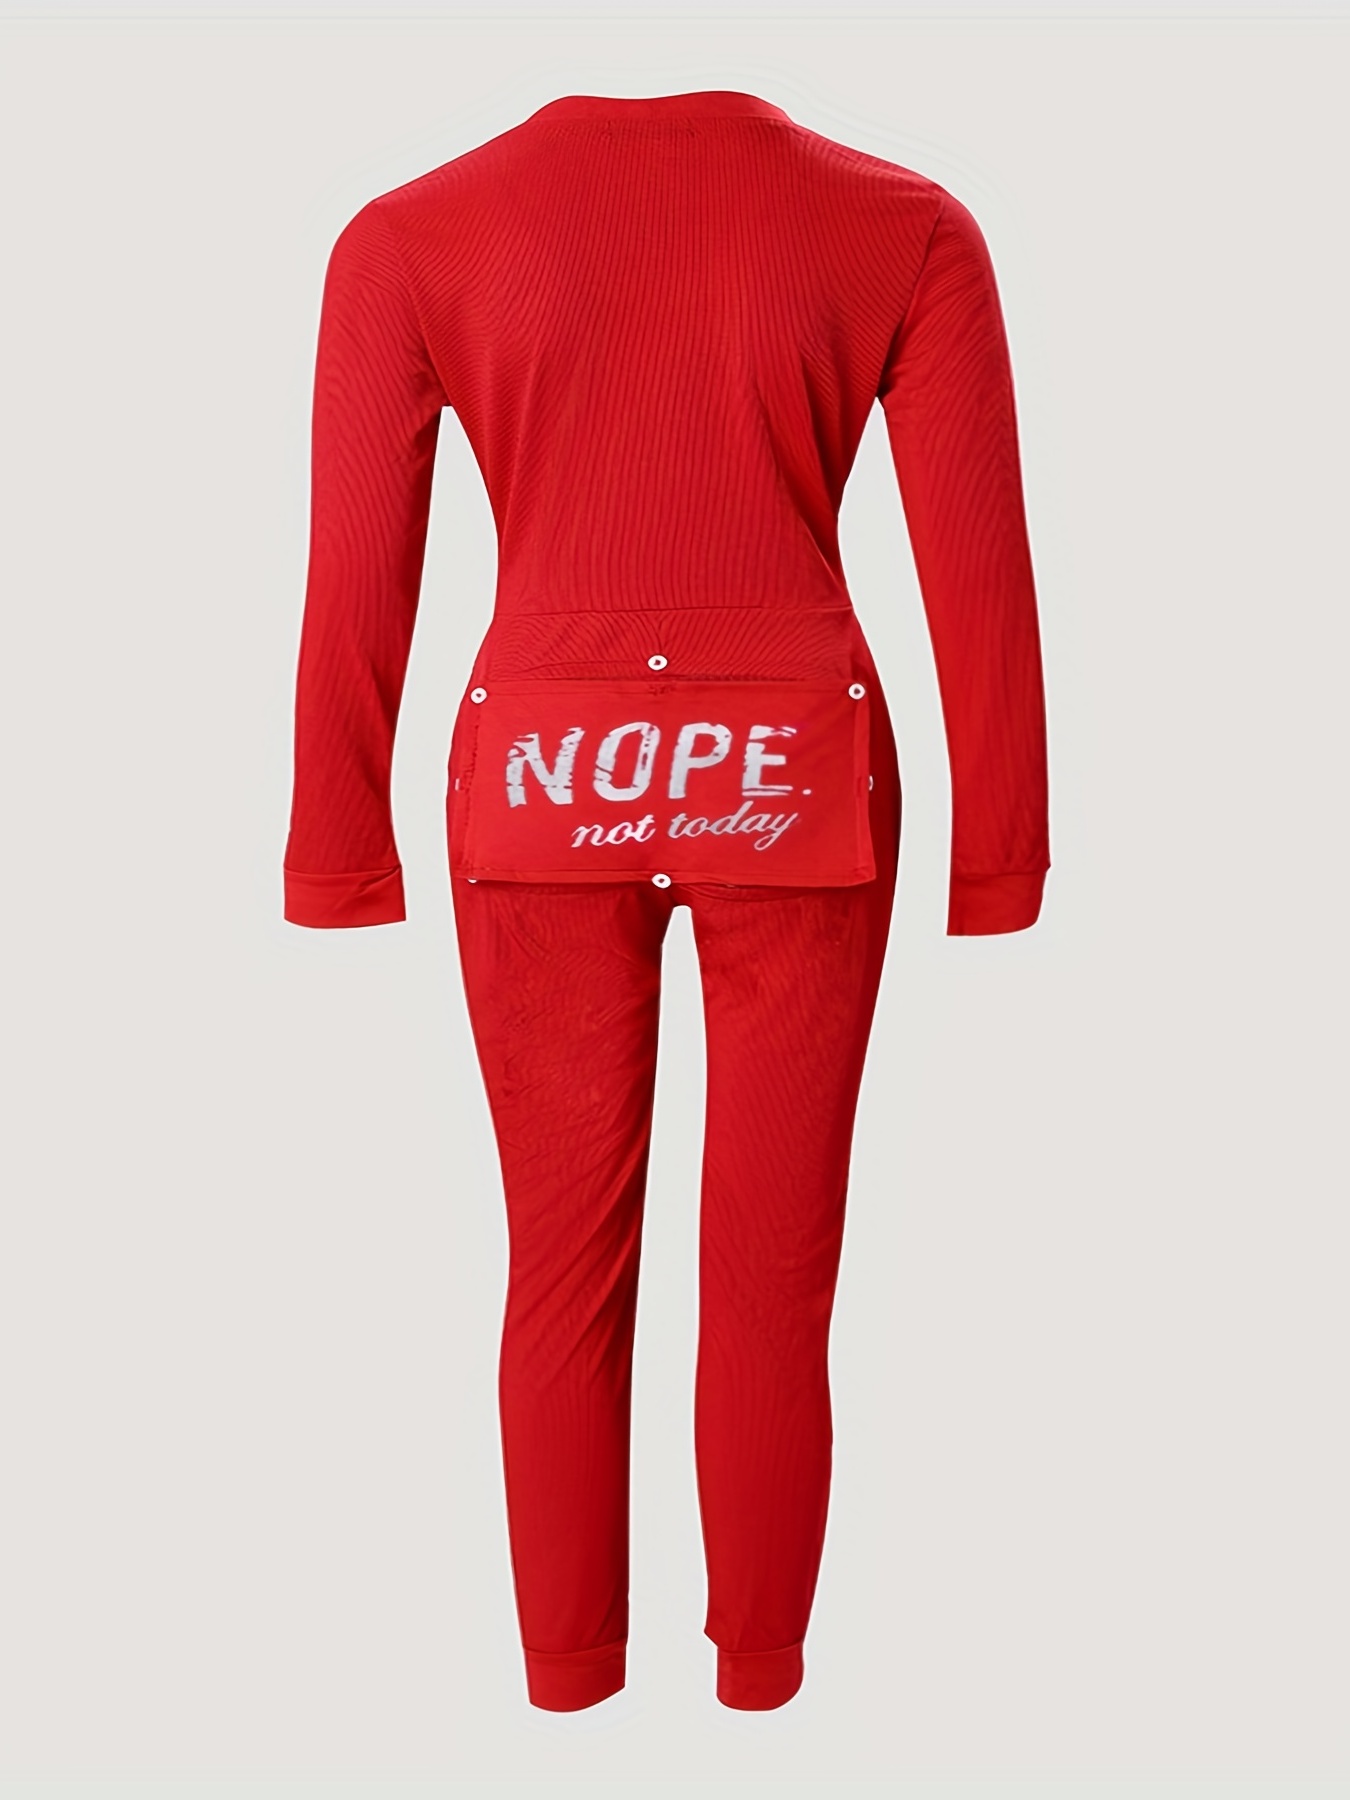 Red Long Johns Pajamas with Funny Rear Flap No Entry Sleeper